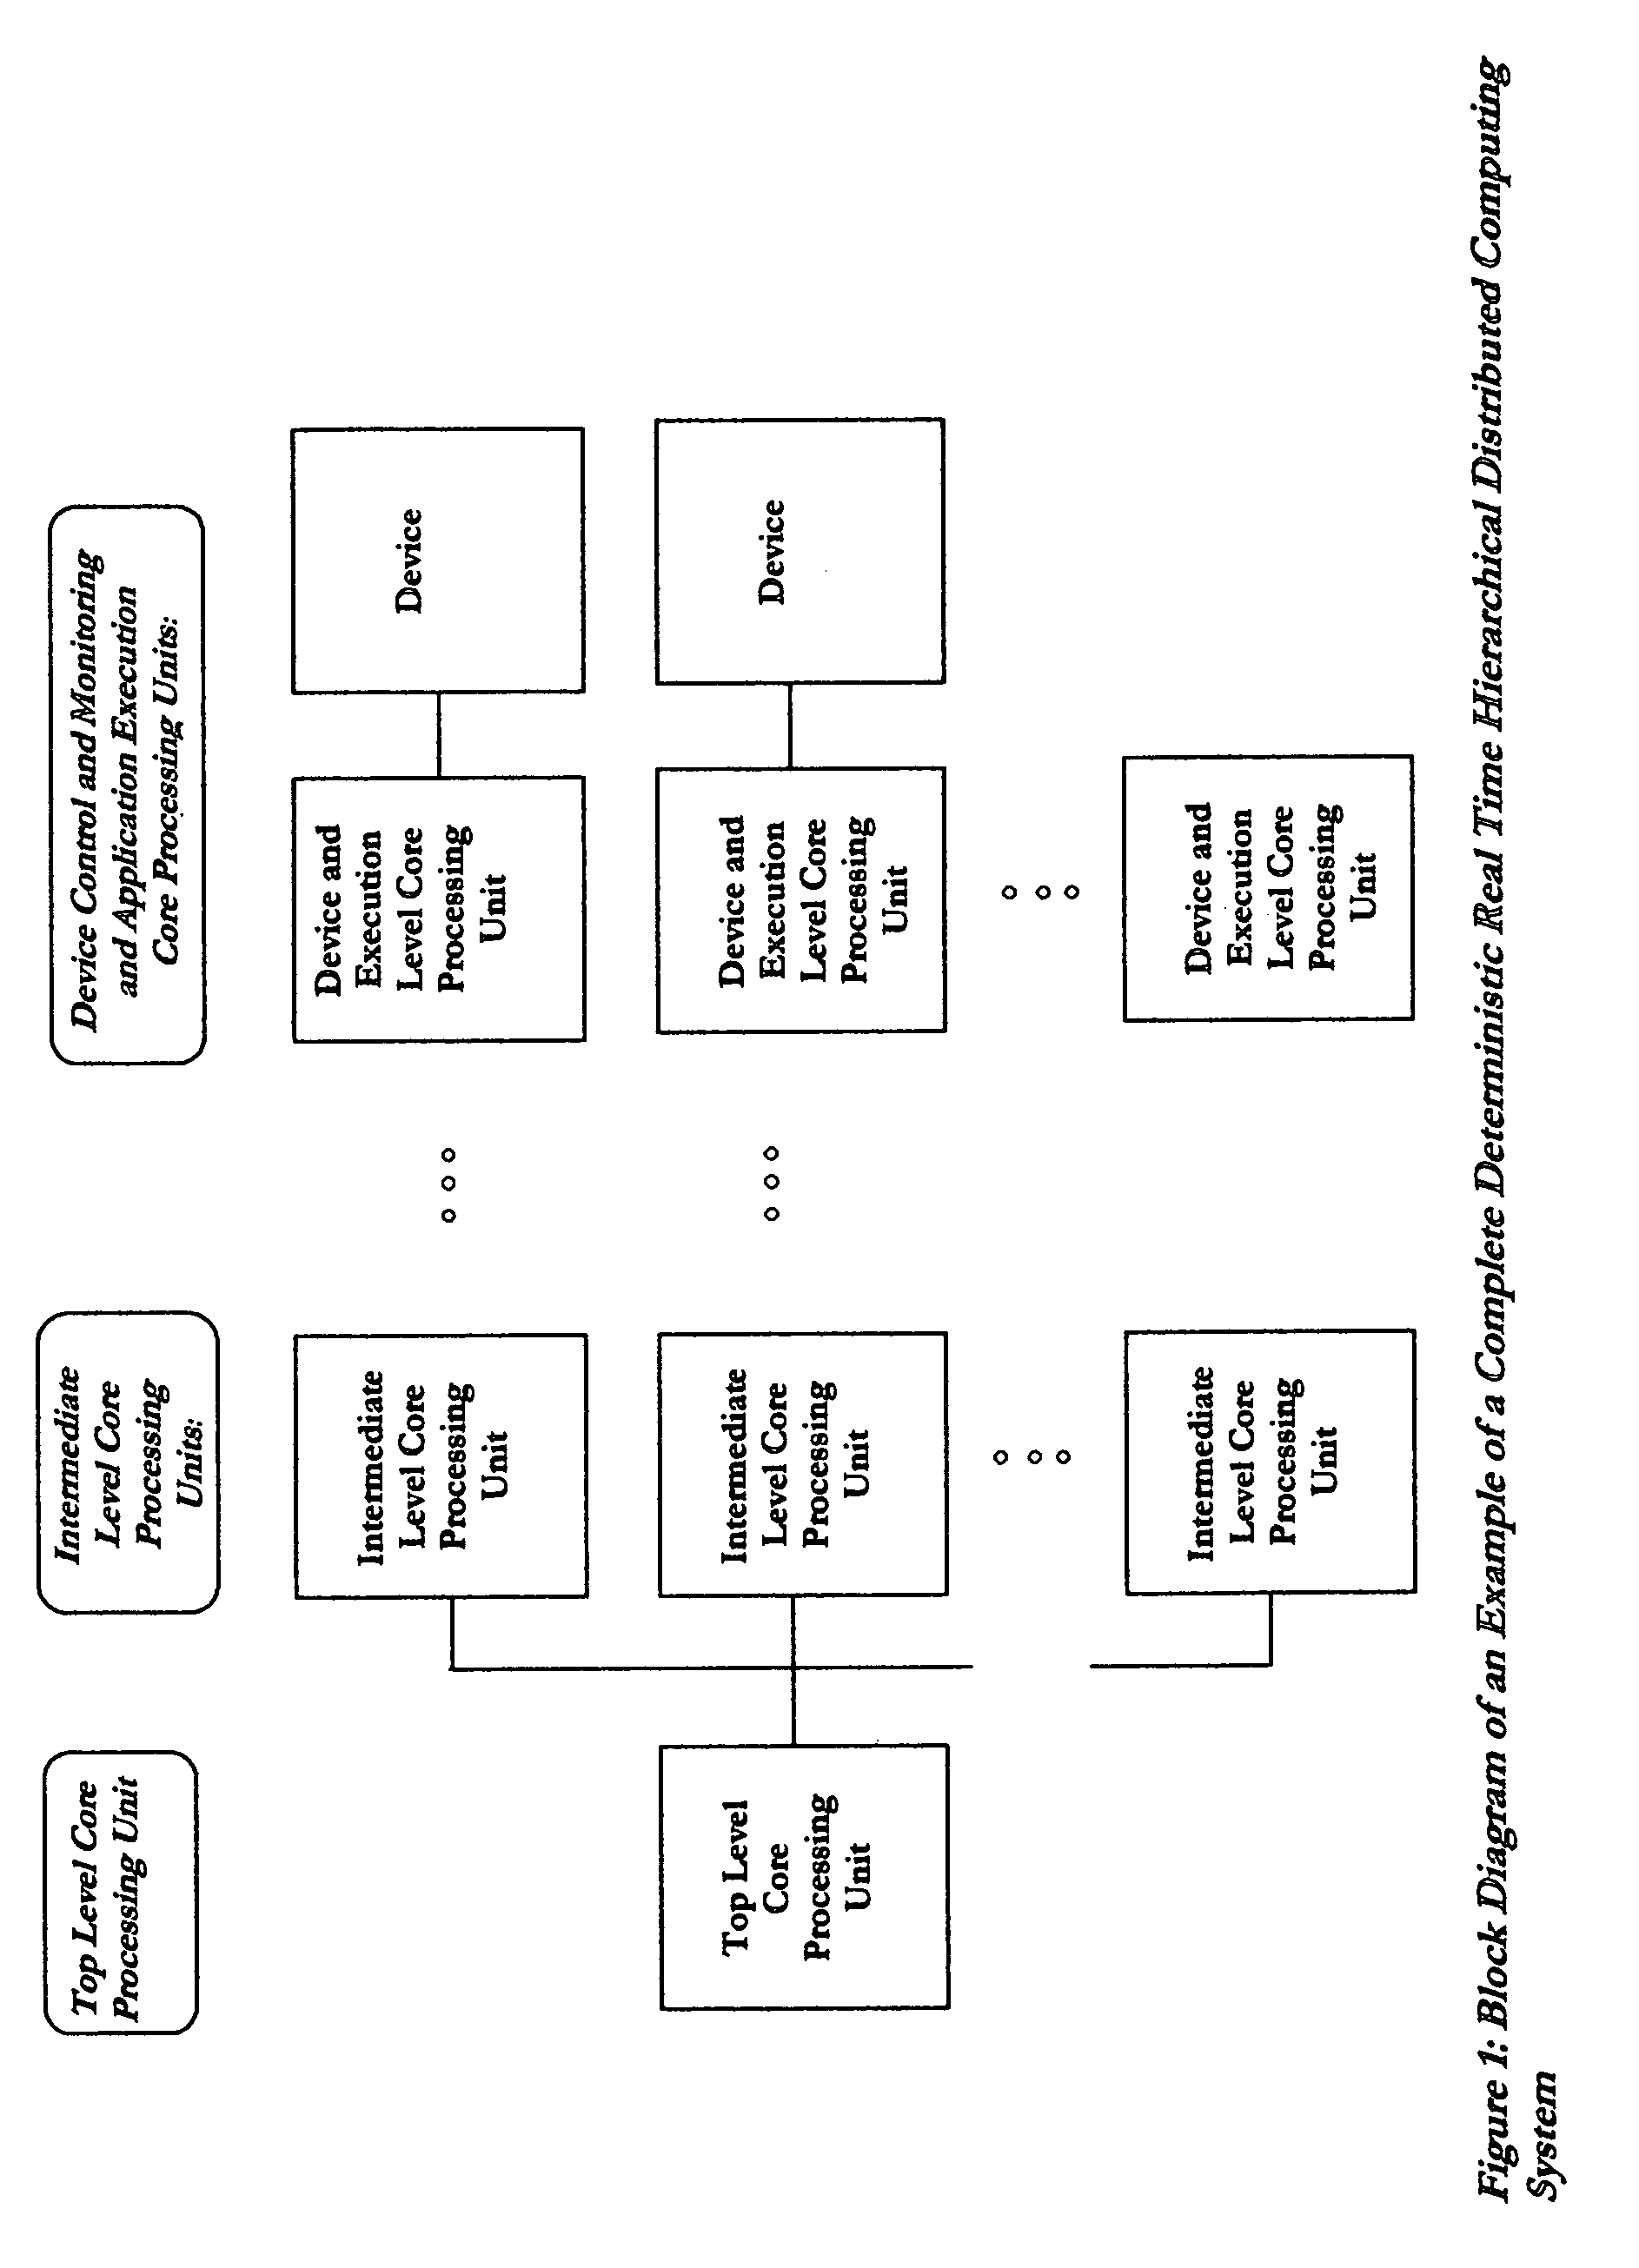 Deterministic real time hierarchical distributed computing system